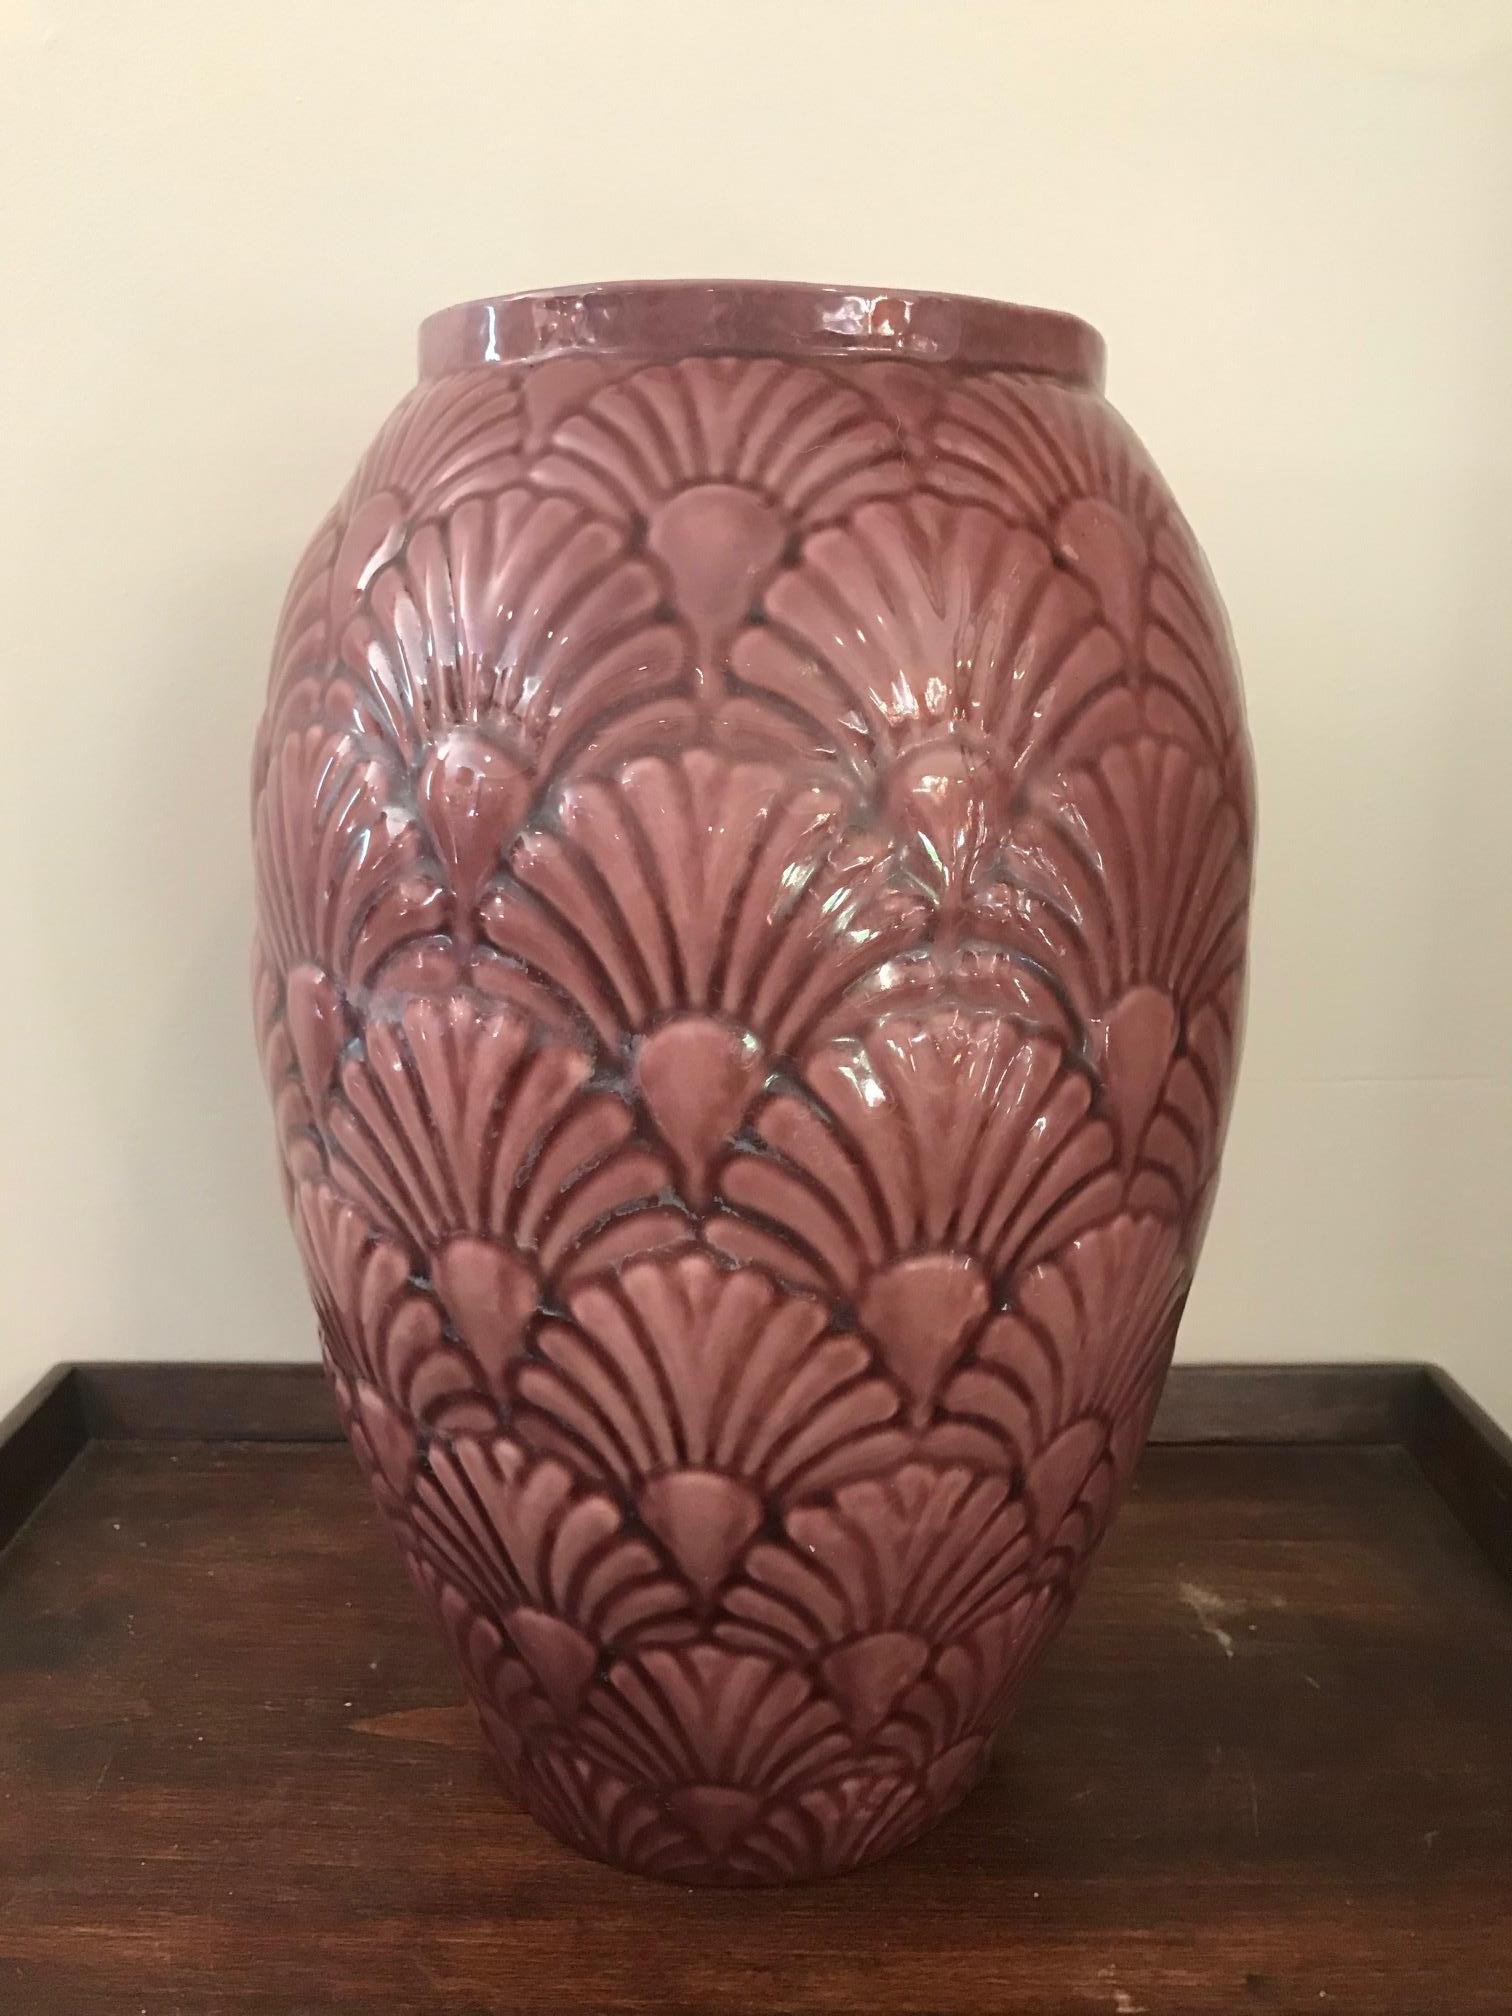 Beautiful 20th century French Painting melting Art deco vase from the 1930s. 
Nice pink color. Flower shape typical from the Art deco period. 
Small fading on the base but good general condition.